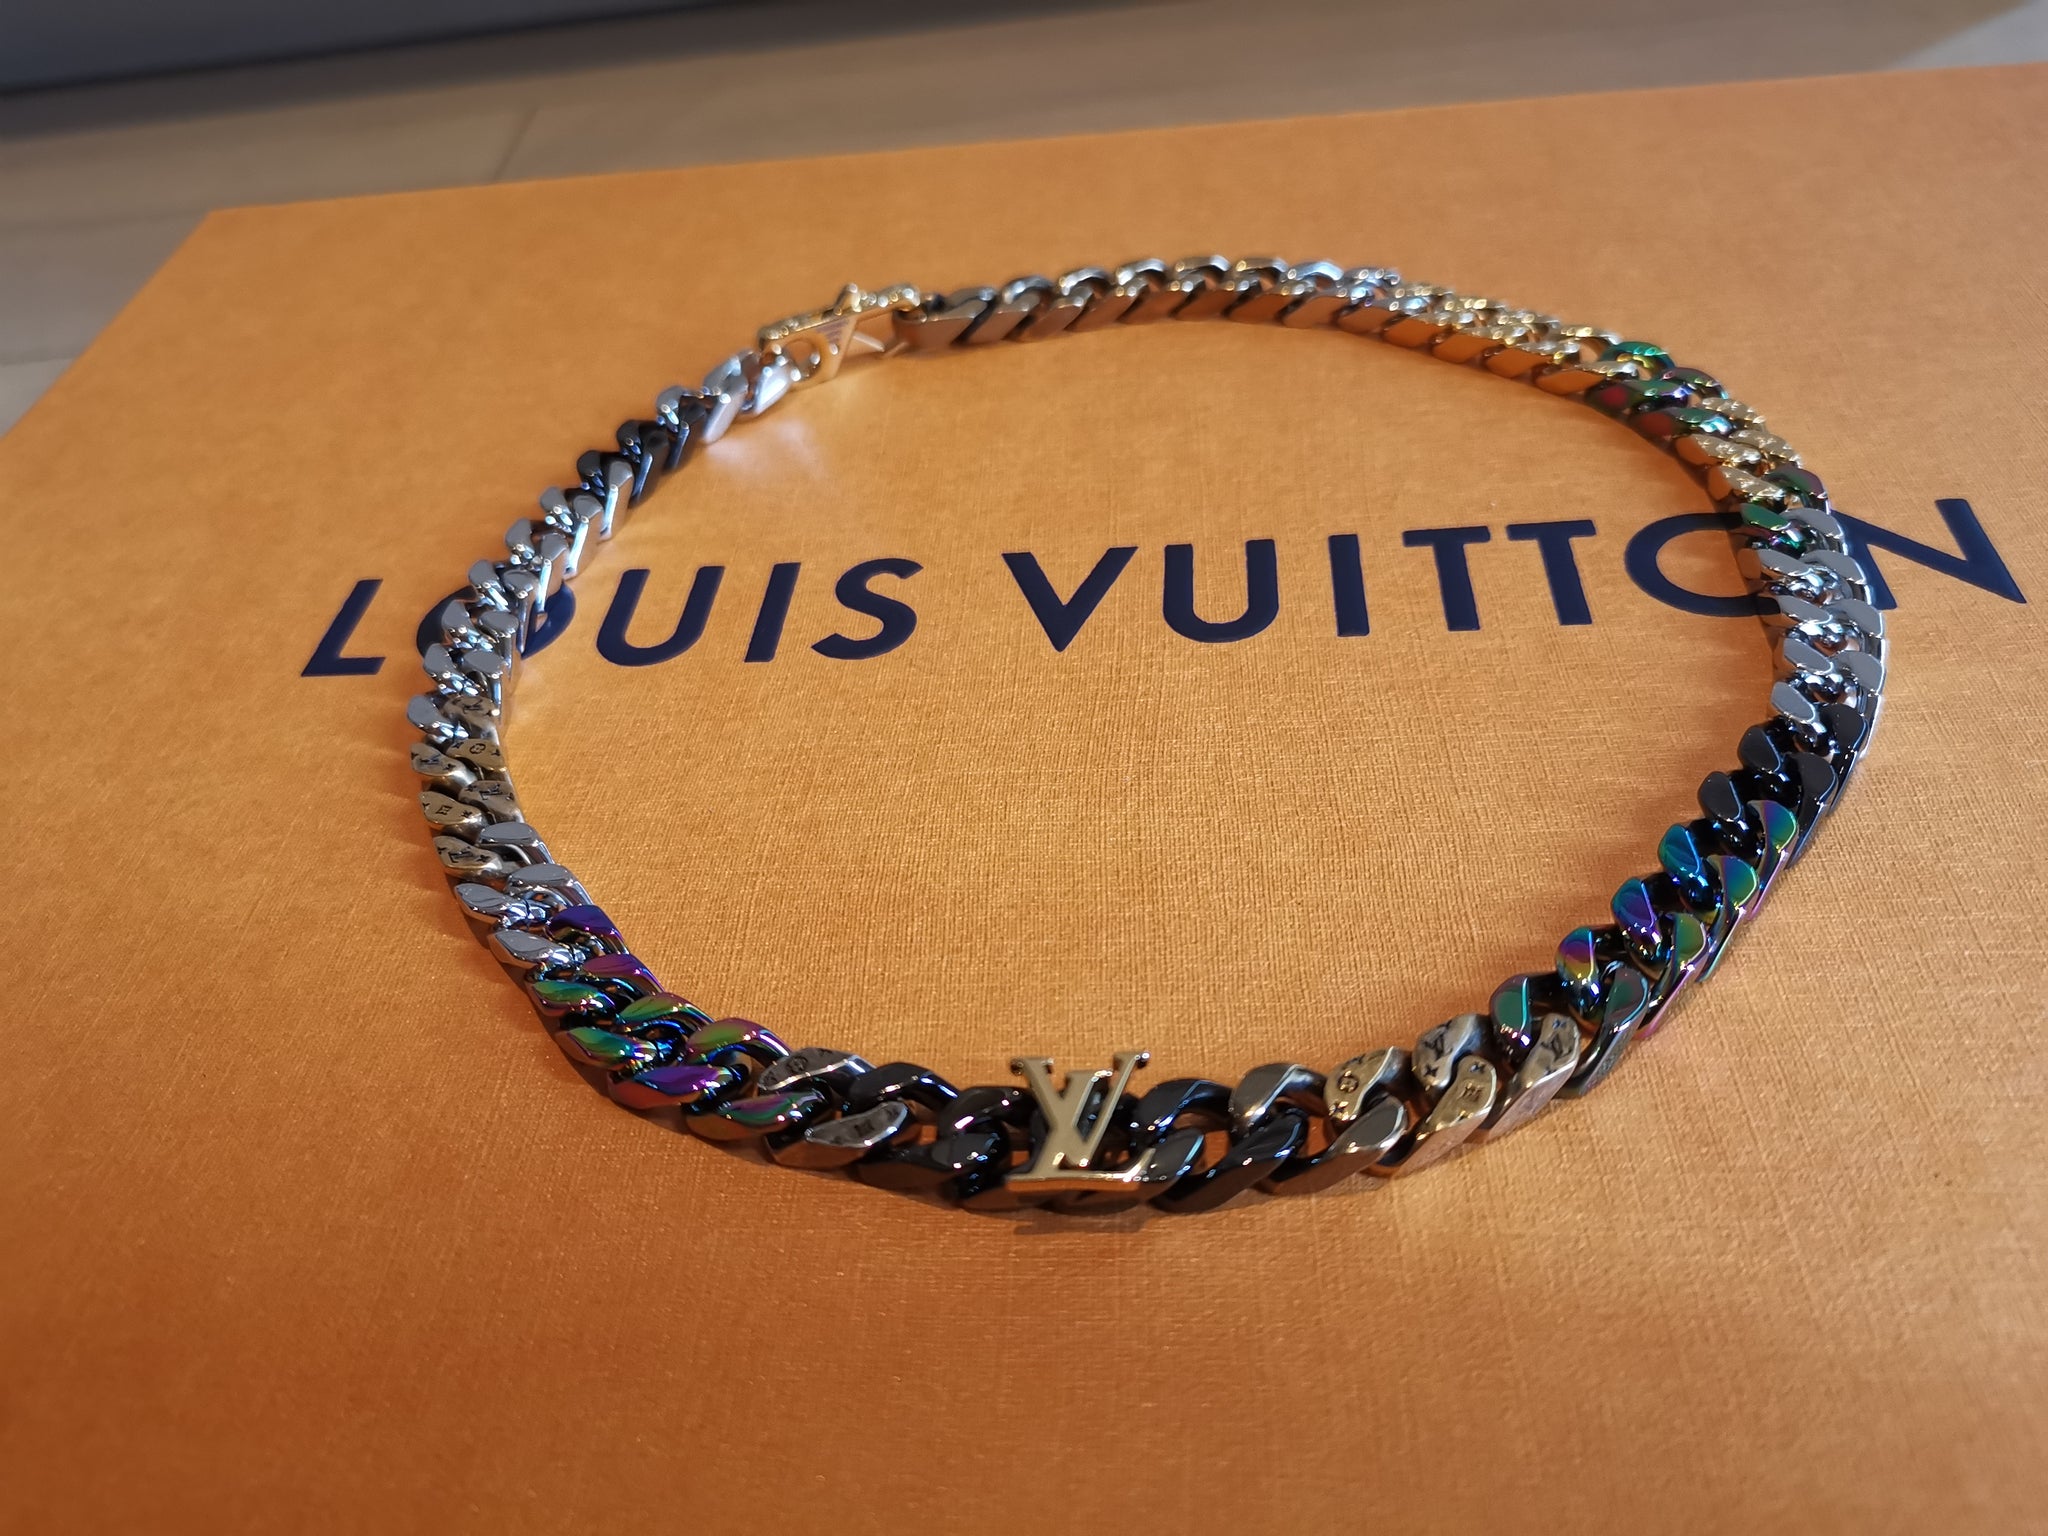 Louis Vuitton Chain Links Patches Necklace, Multi, One Size